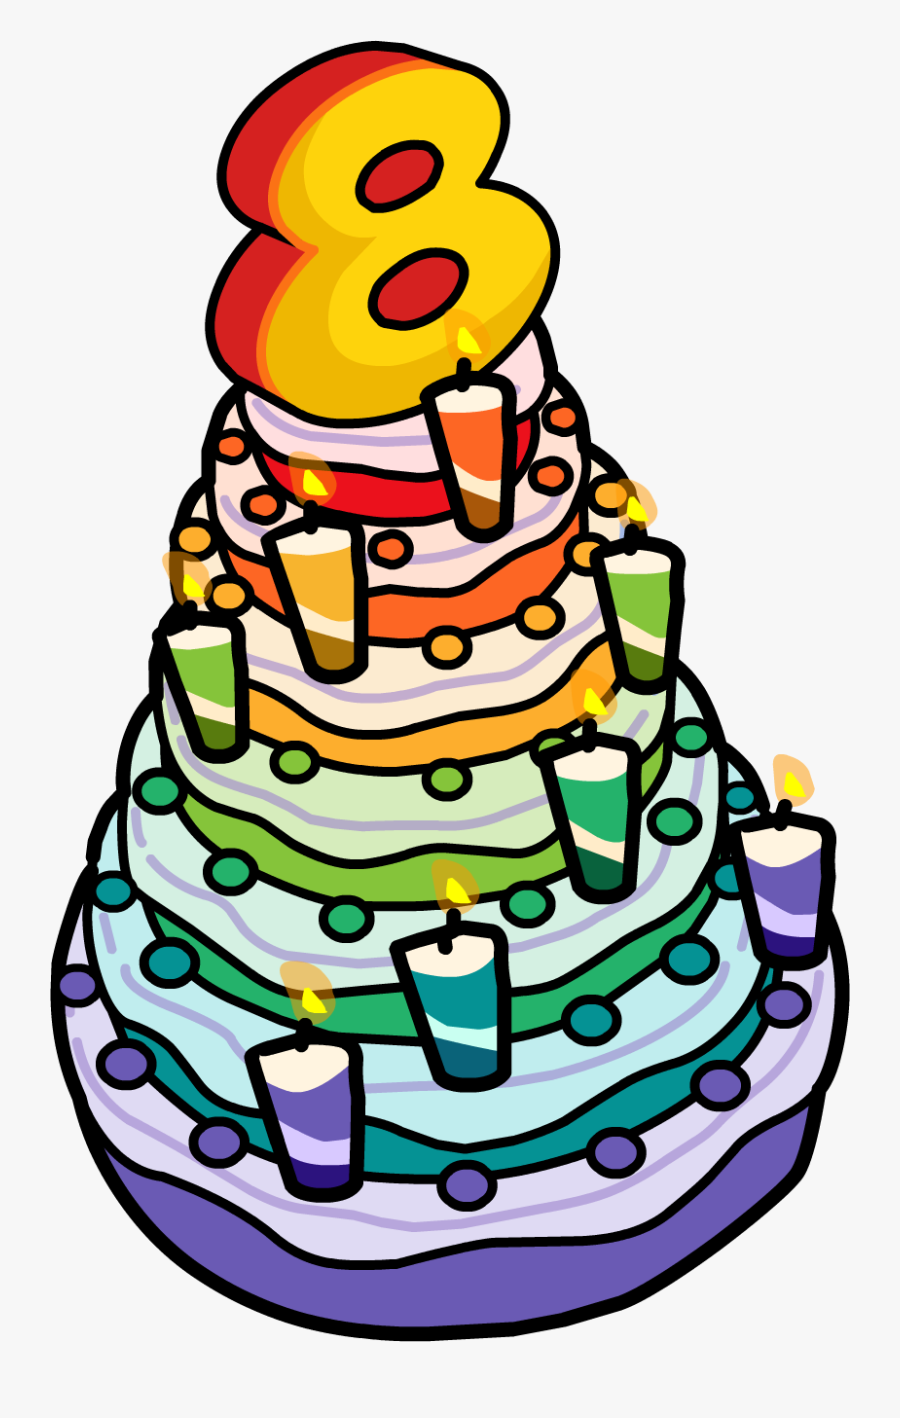 8th Anniversary Party Cake - 8th Birthday Cake Clip Art, Transparent Clipart